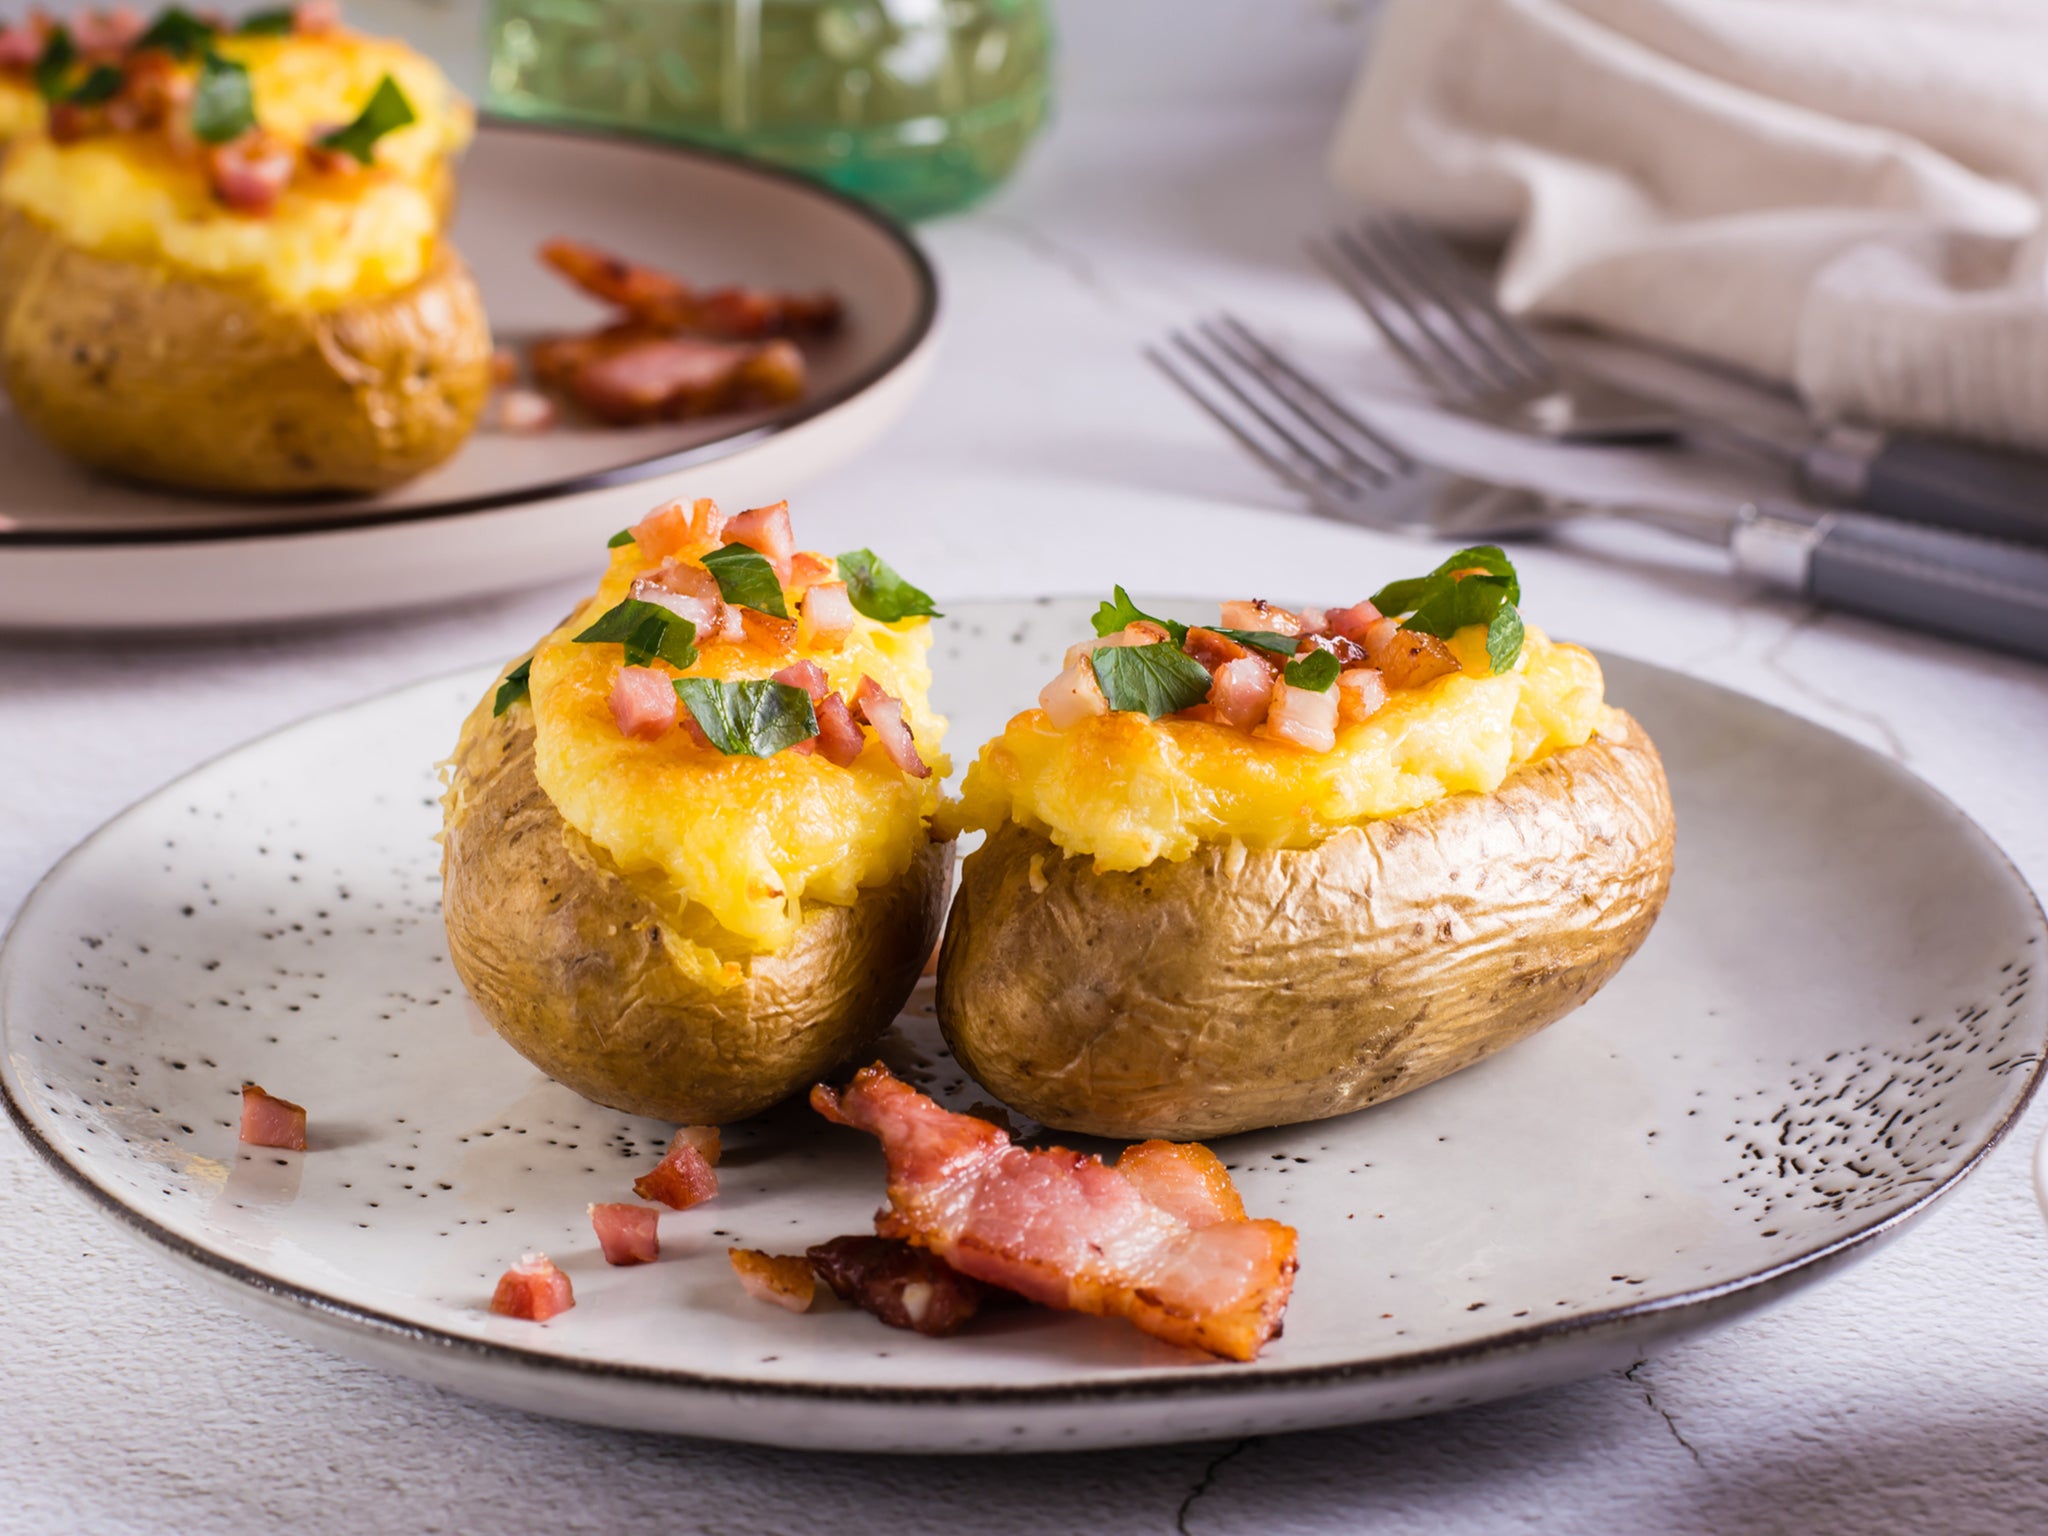 Cheesy and bacon-filled stuffed potatoes, crispy and delicious from the air fryer